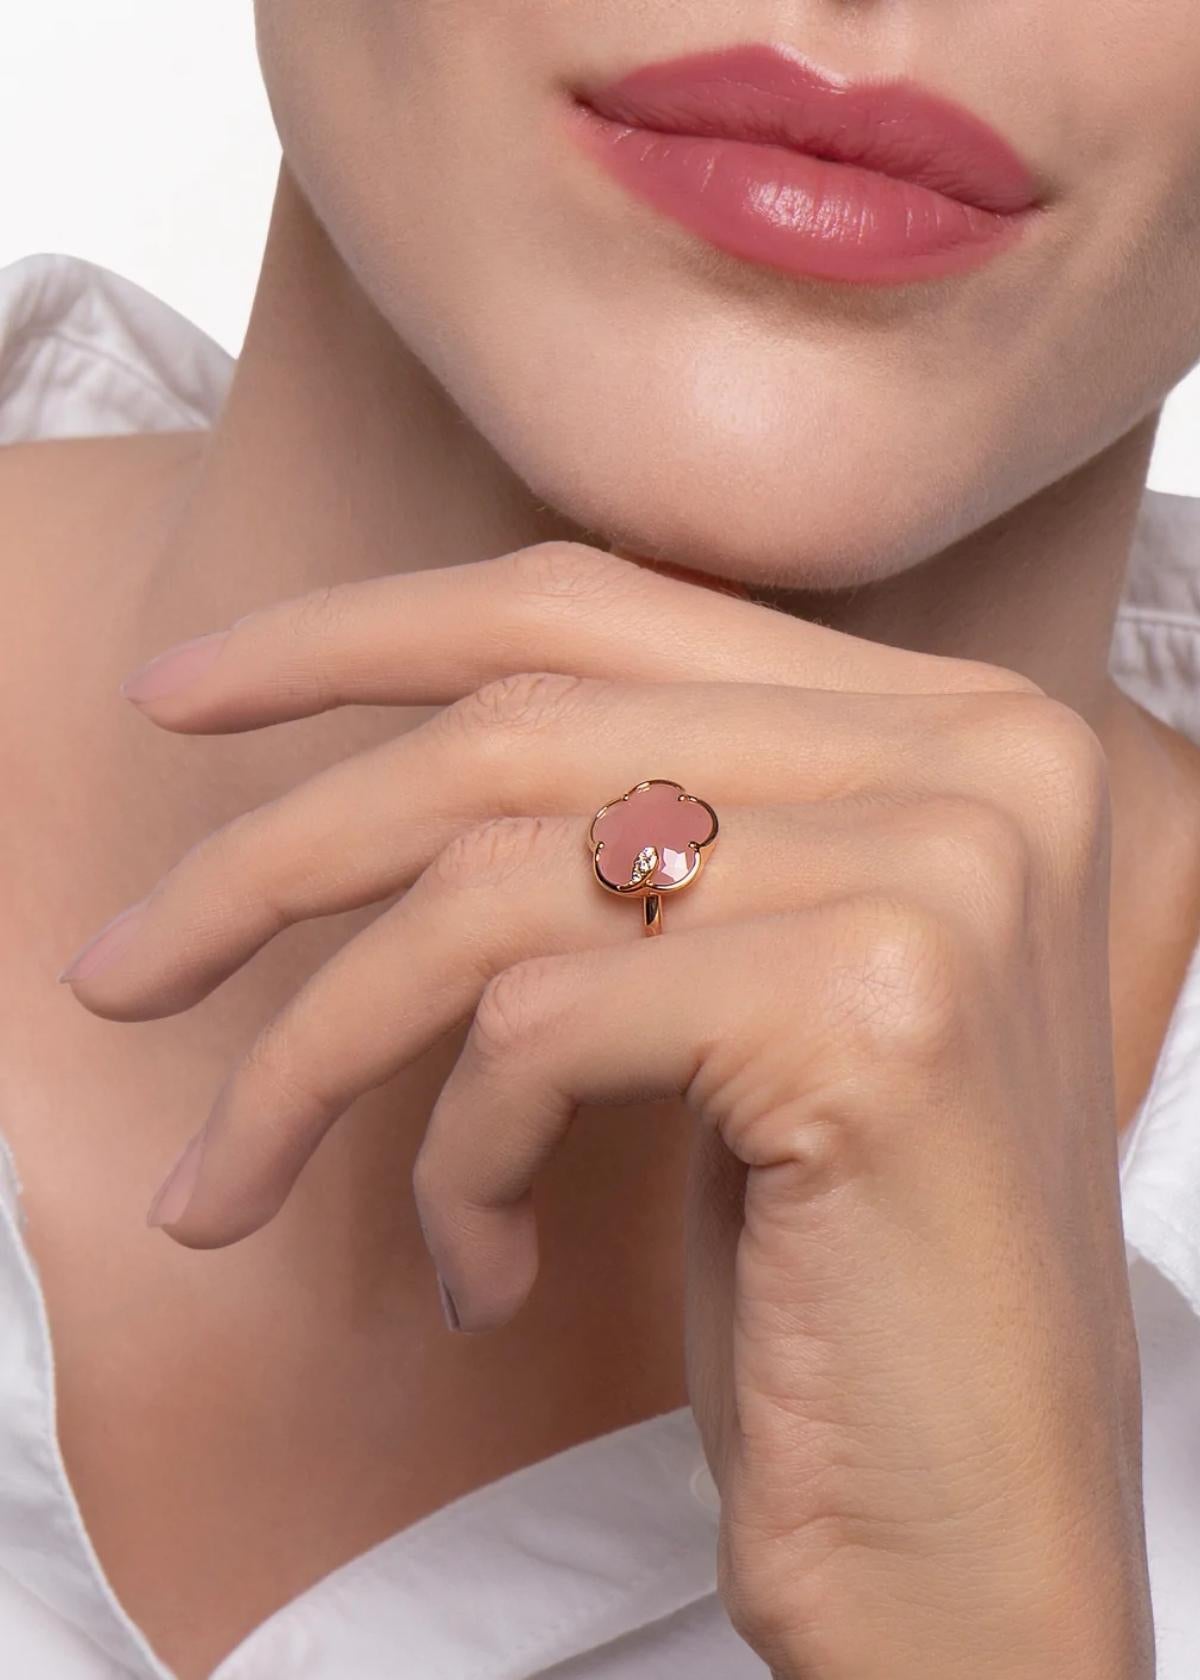 Petit Joli Ring in 18k Rose Gold with Pink Chalcedony, White and Champagne Diamonds.

Petit Joli is a floral dream on your skin. The collection is designed for women always blooming in a free soul. This collection embodies the everlasting connection